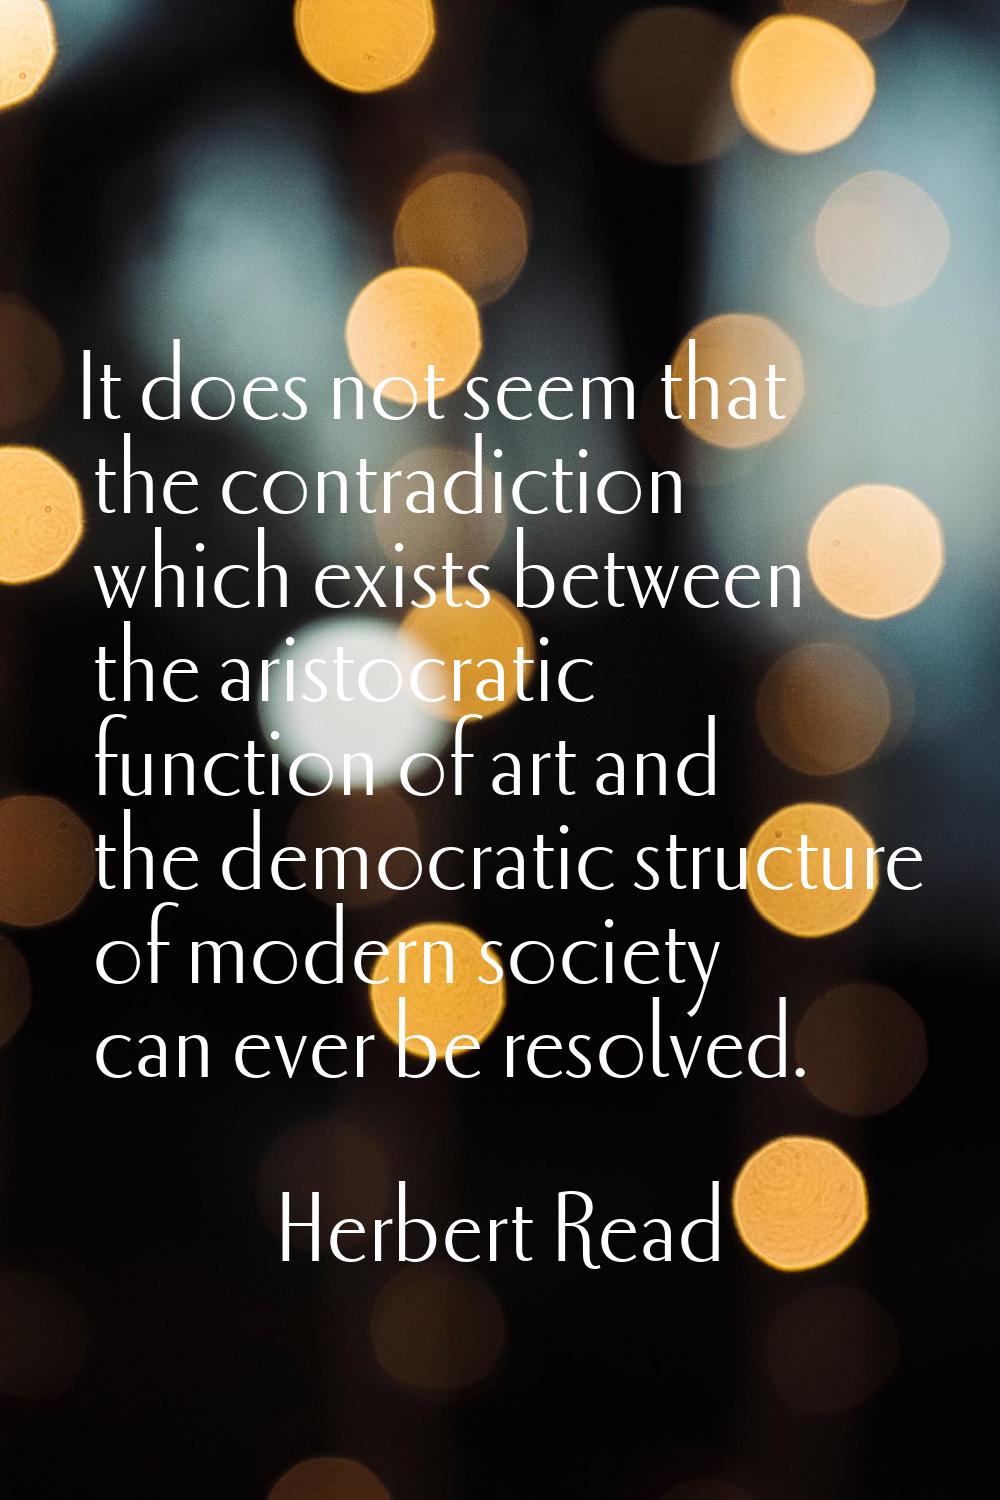 It does not seem that the contradiction which exists between the aristocratic function of art and t